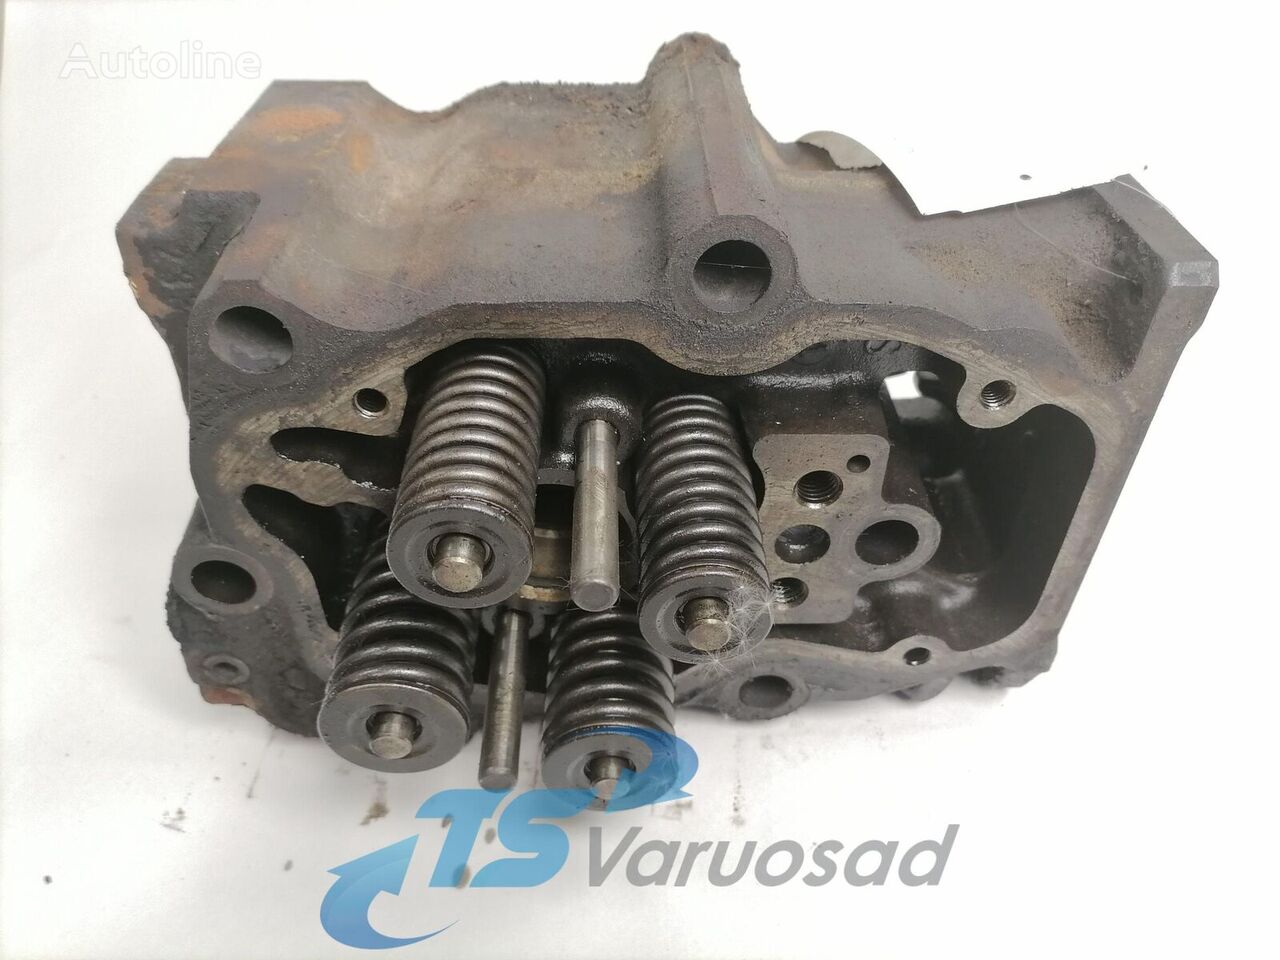 Scania Cylinder head, HPI 1522361 for Scania 124 truck tractor